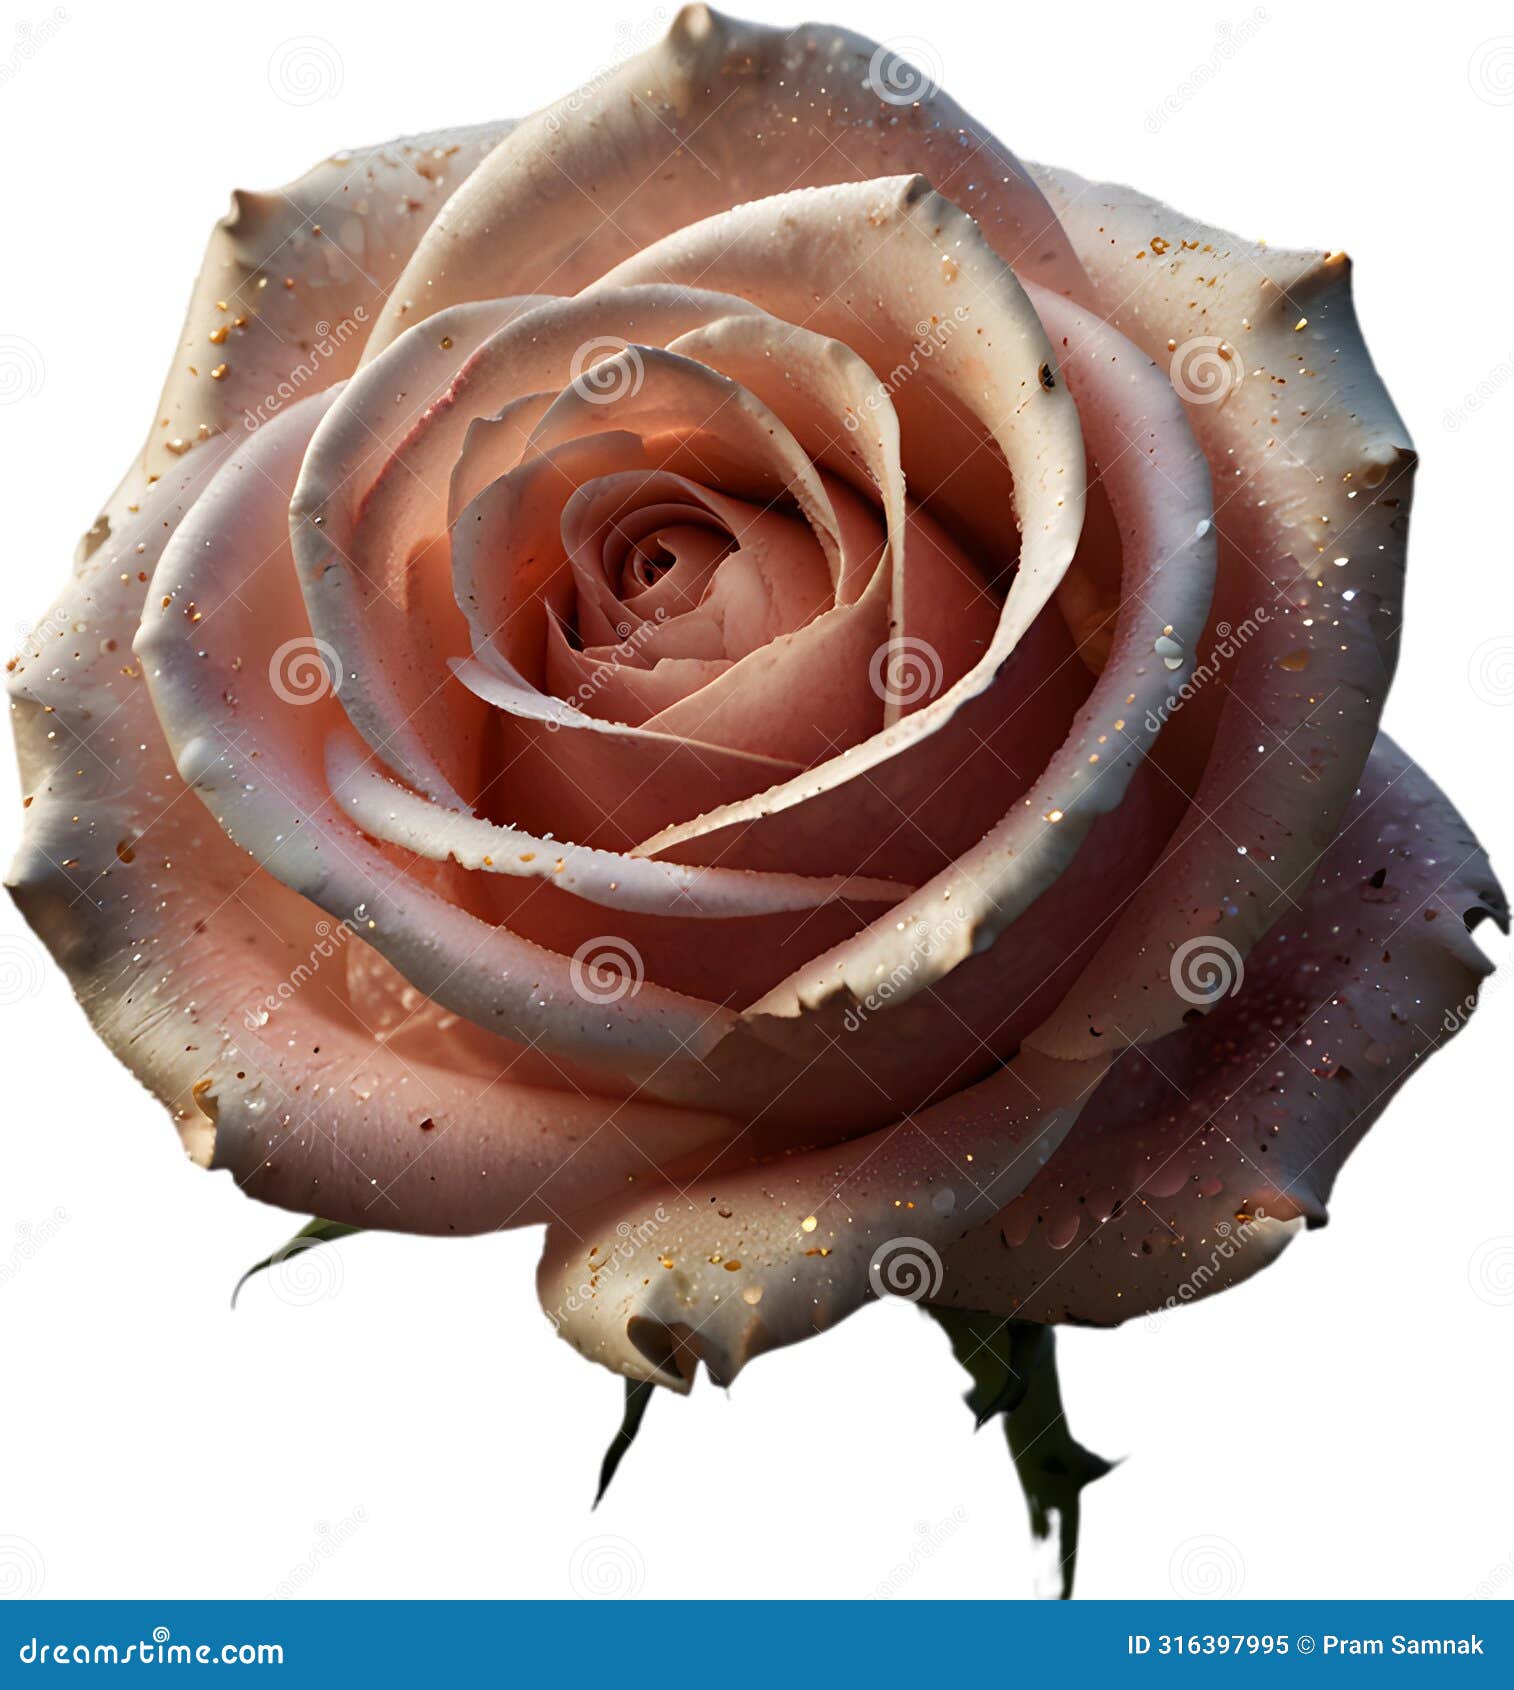 magical stardust rose of enchantment, stardust rose clipart for decoration.